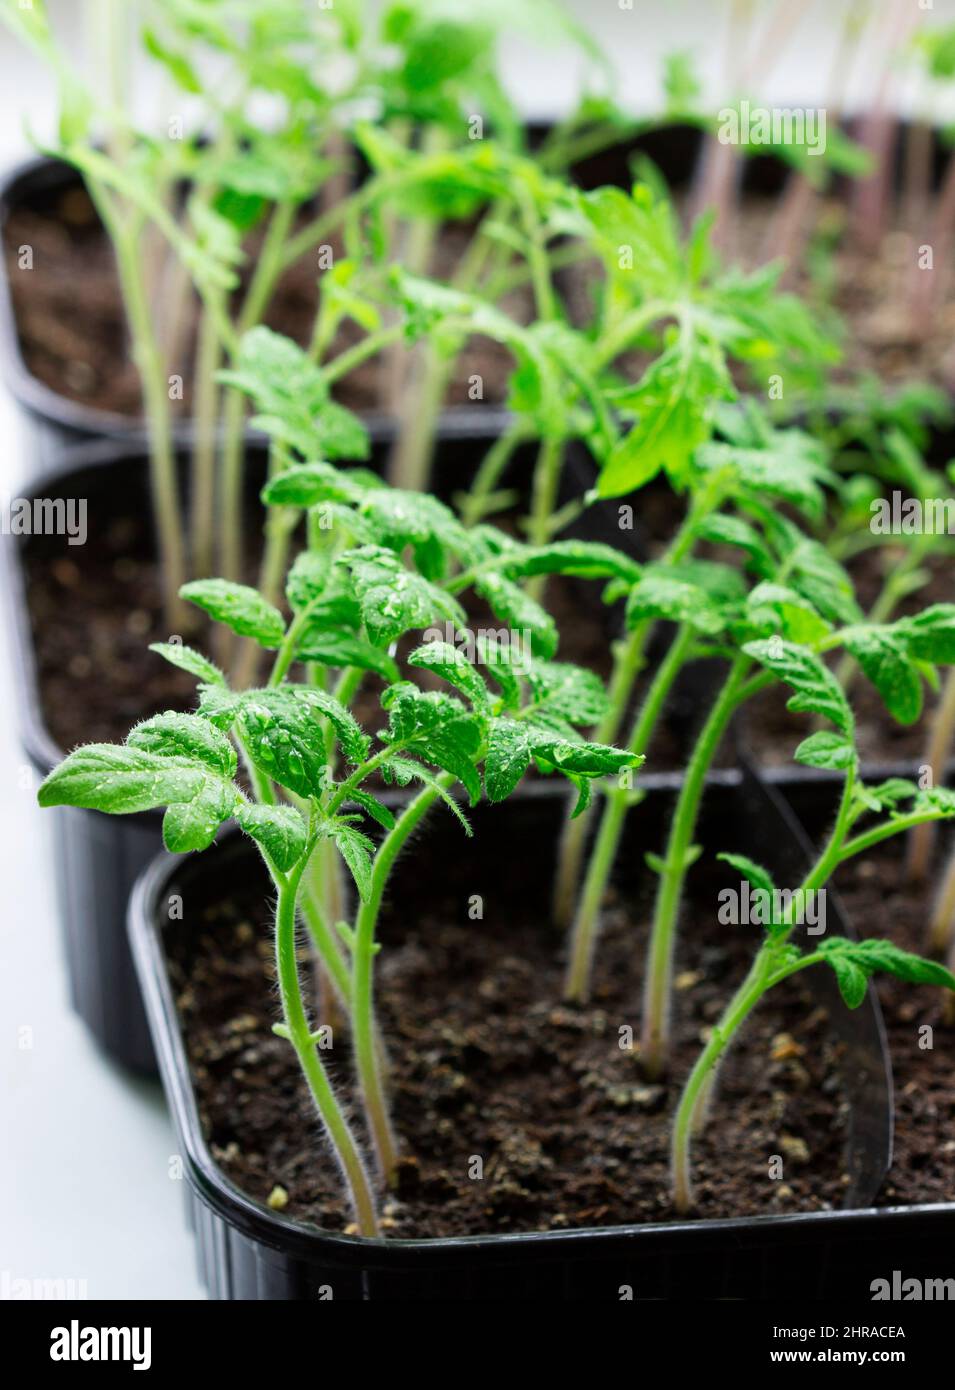 Seedlings of tomatoes and celery grown at home on a windowsill. Stock Photo